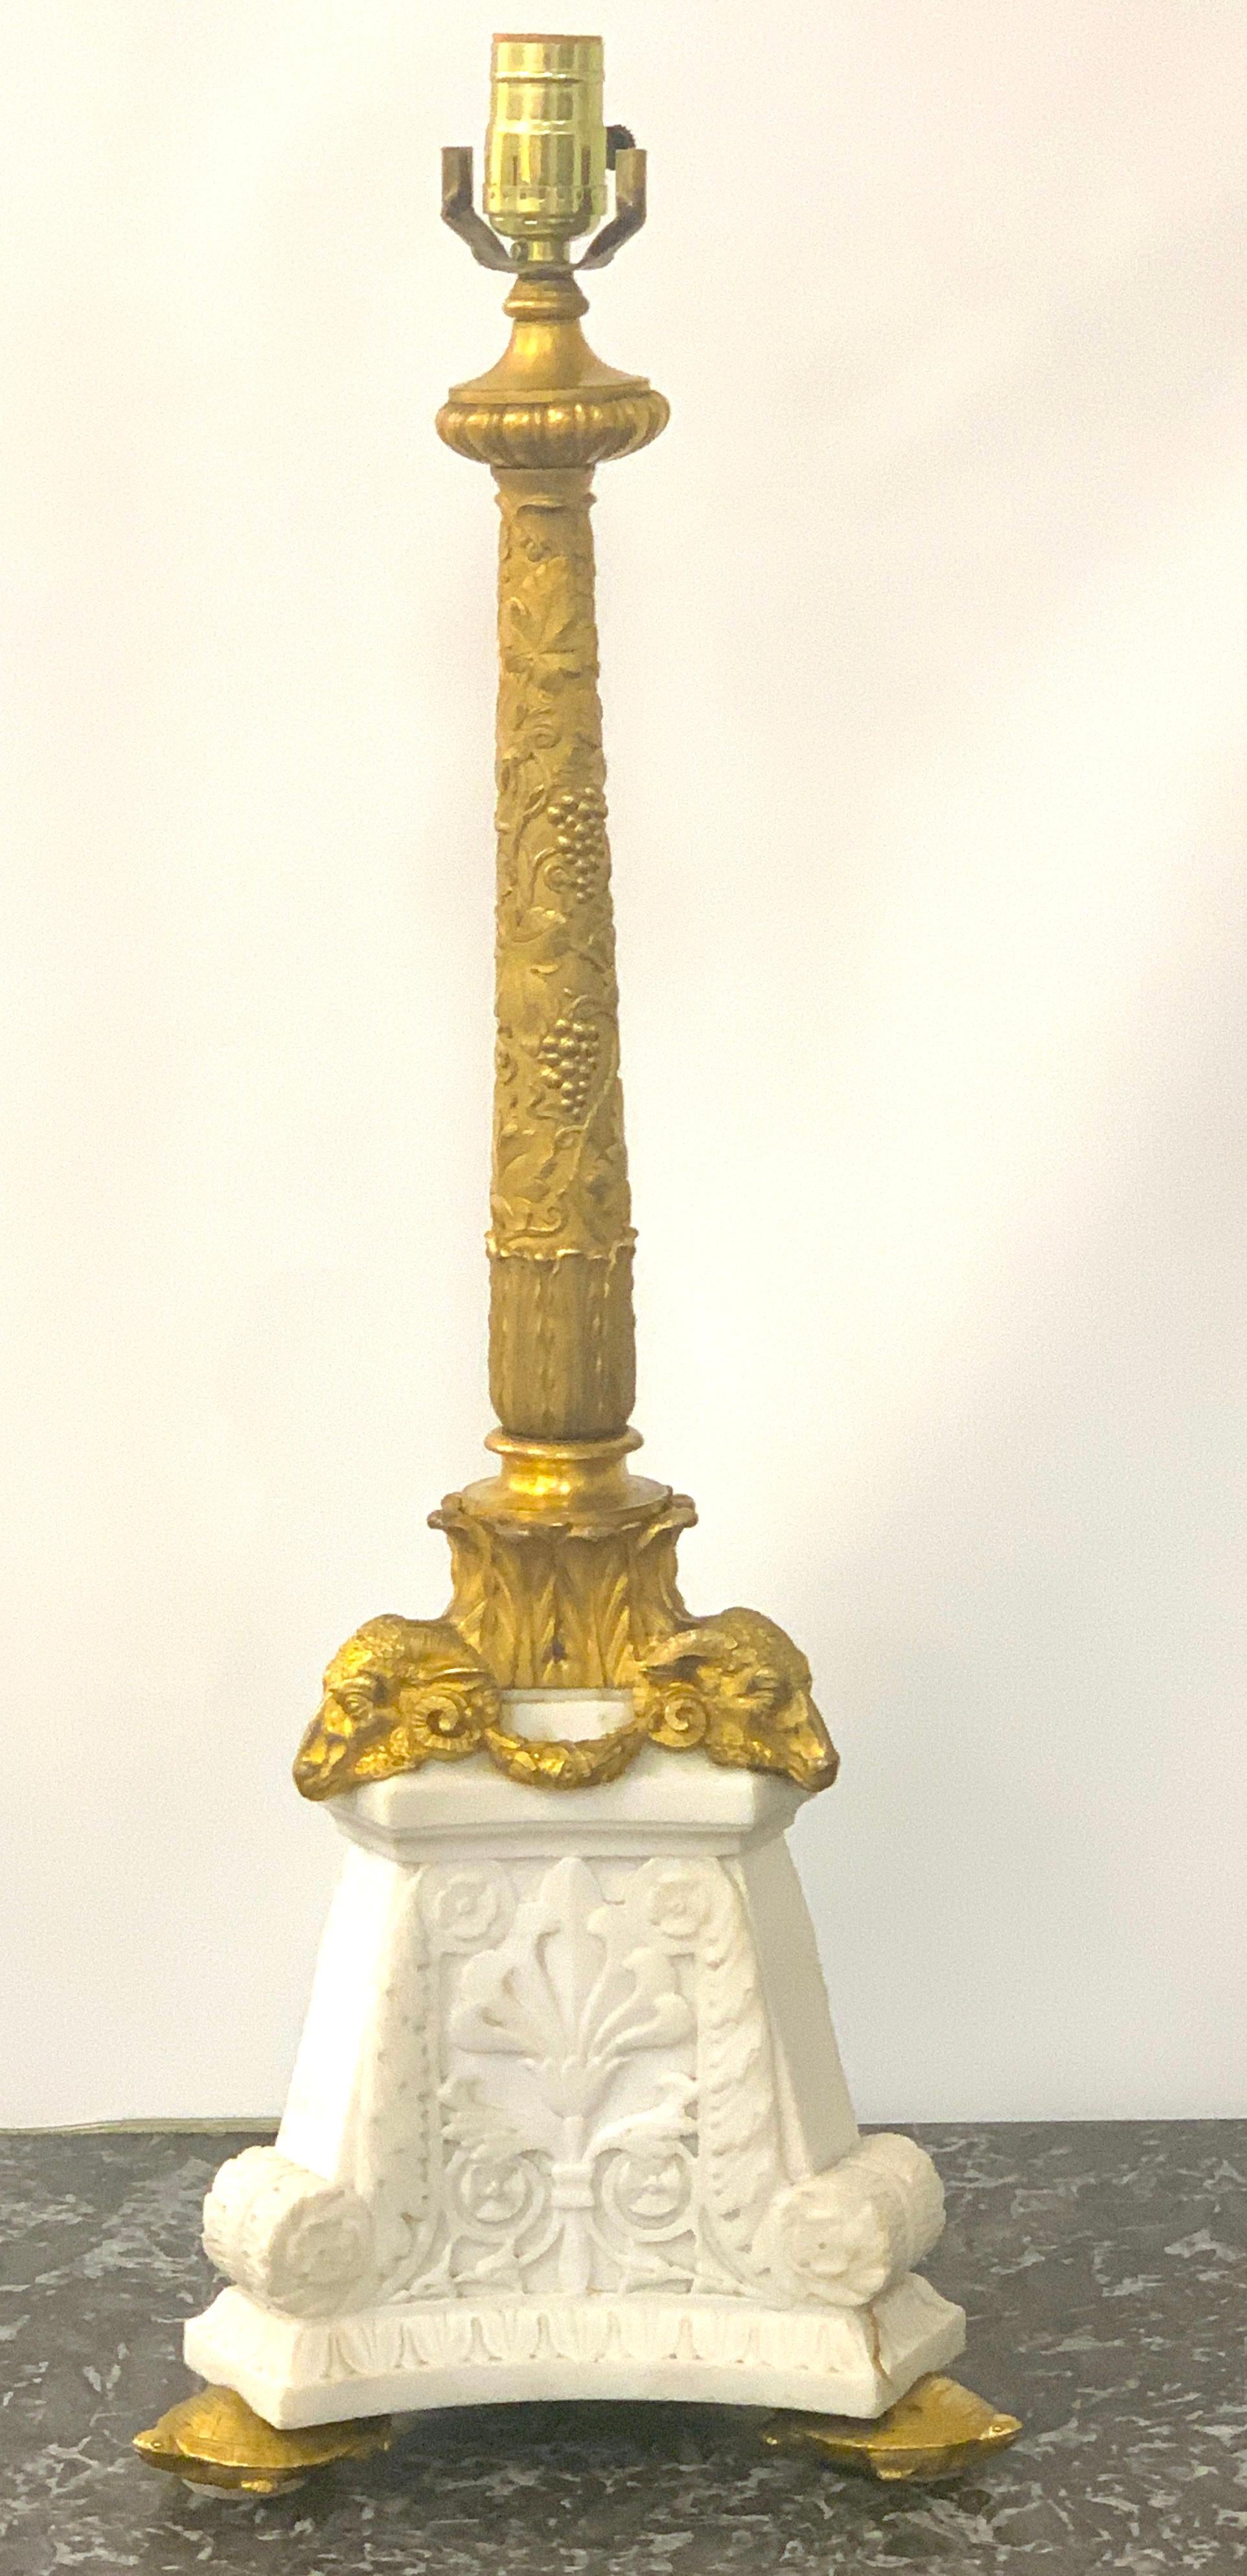 E. F. Caldwell ormolu & carved marble neoclassical lamp, with turtle feet
Magnificent ormolu casting and carved Carrera marble anthemion motif base, Unmarked.
Shown in the last photo with a display shade (not included) 38